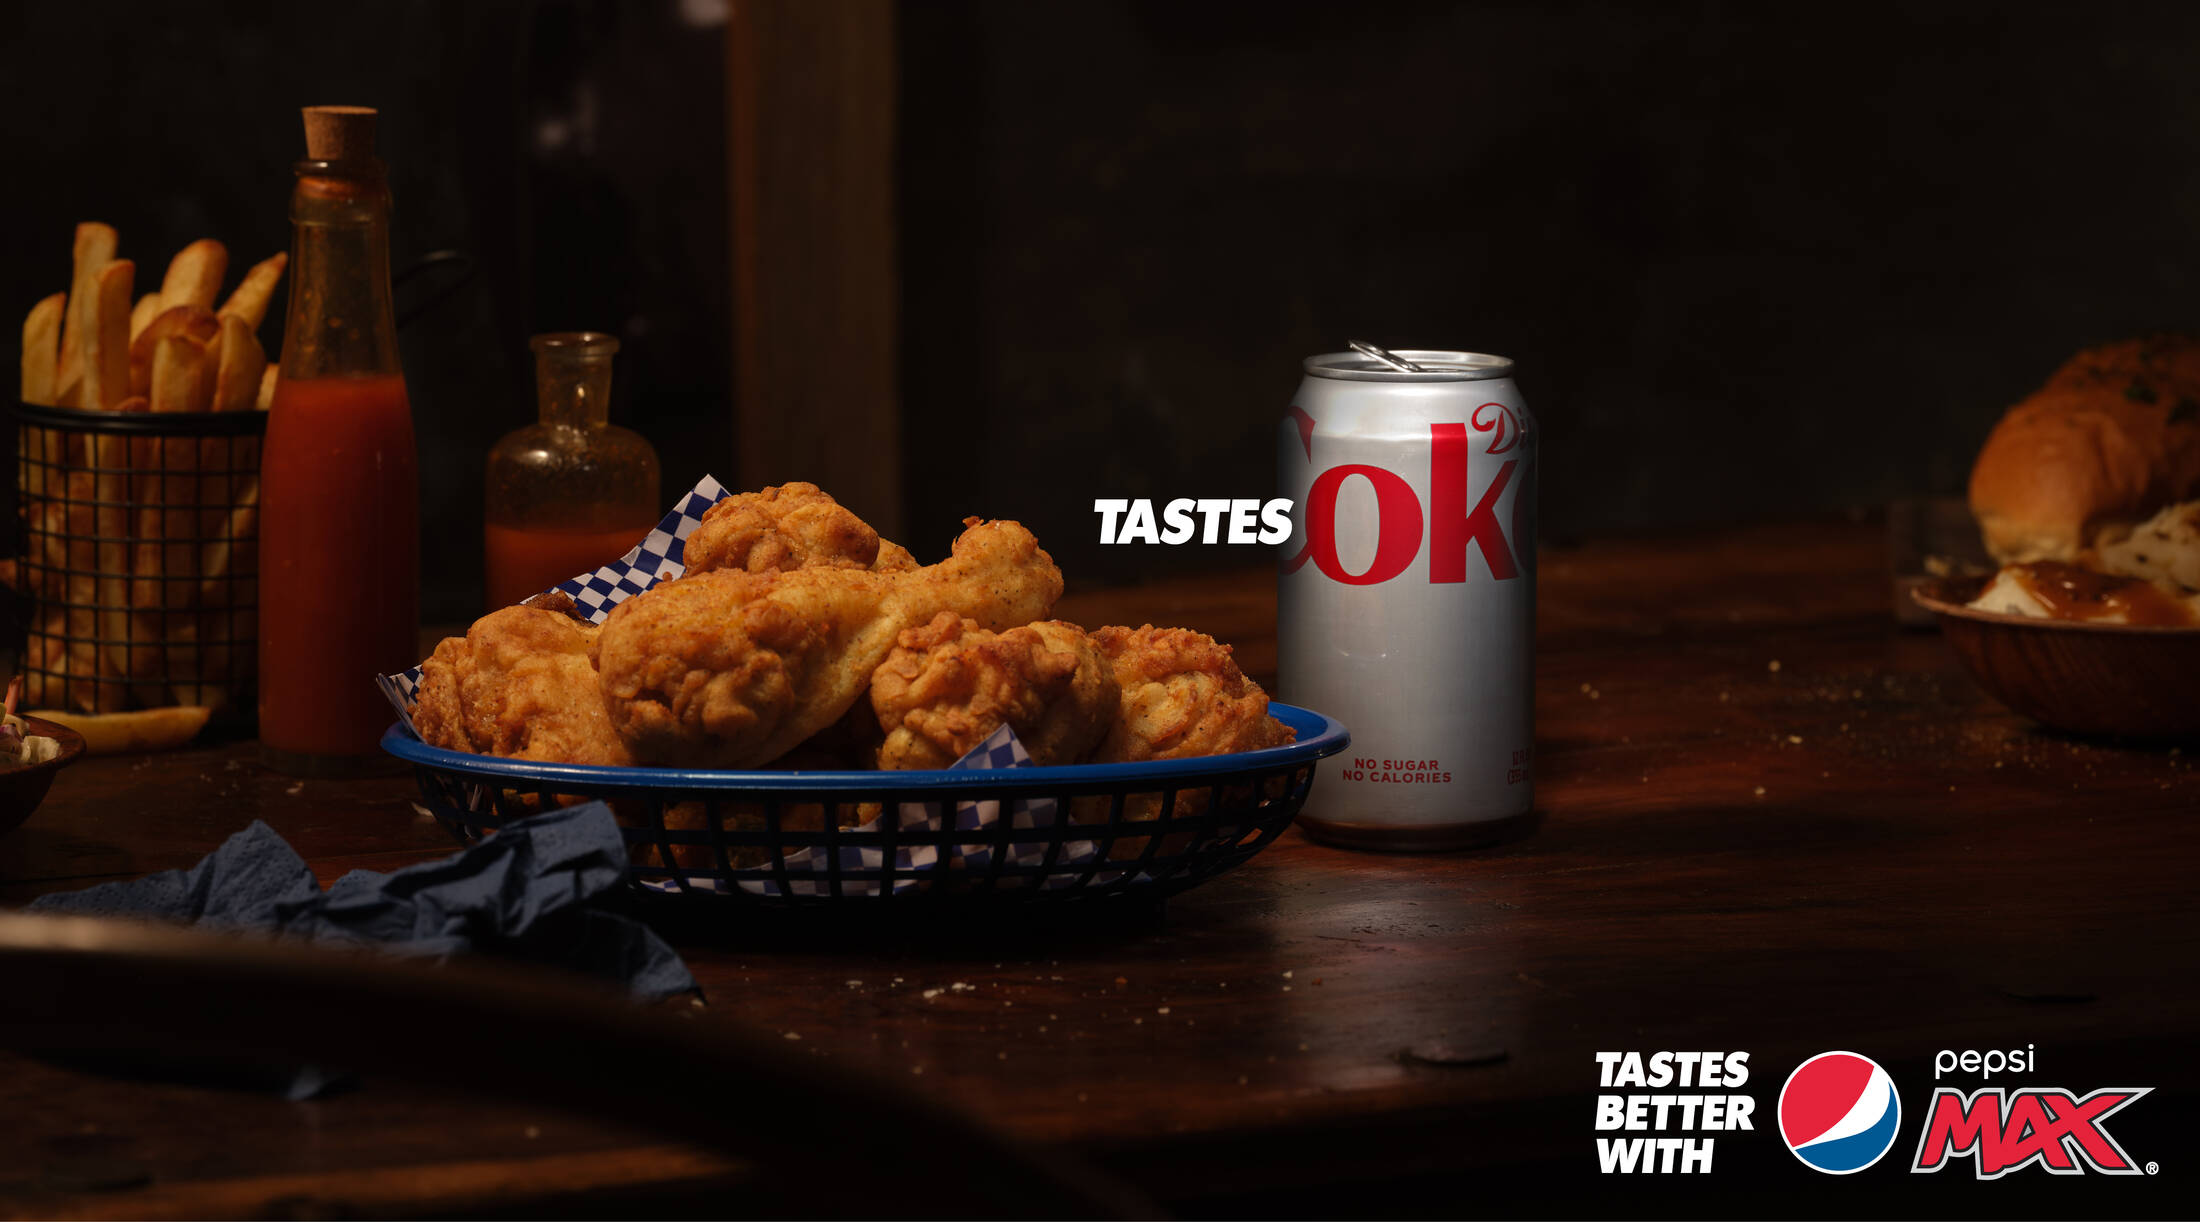 Fried chicken tastes OK with Coke. Taste better with Pepsi Max